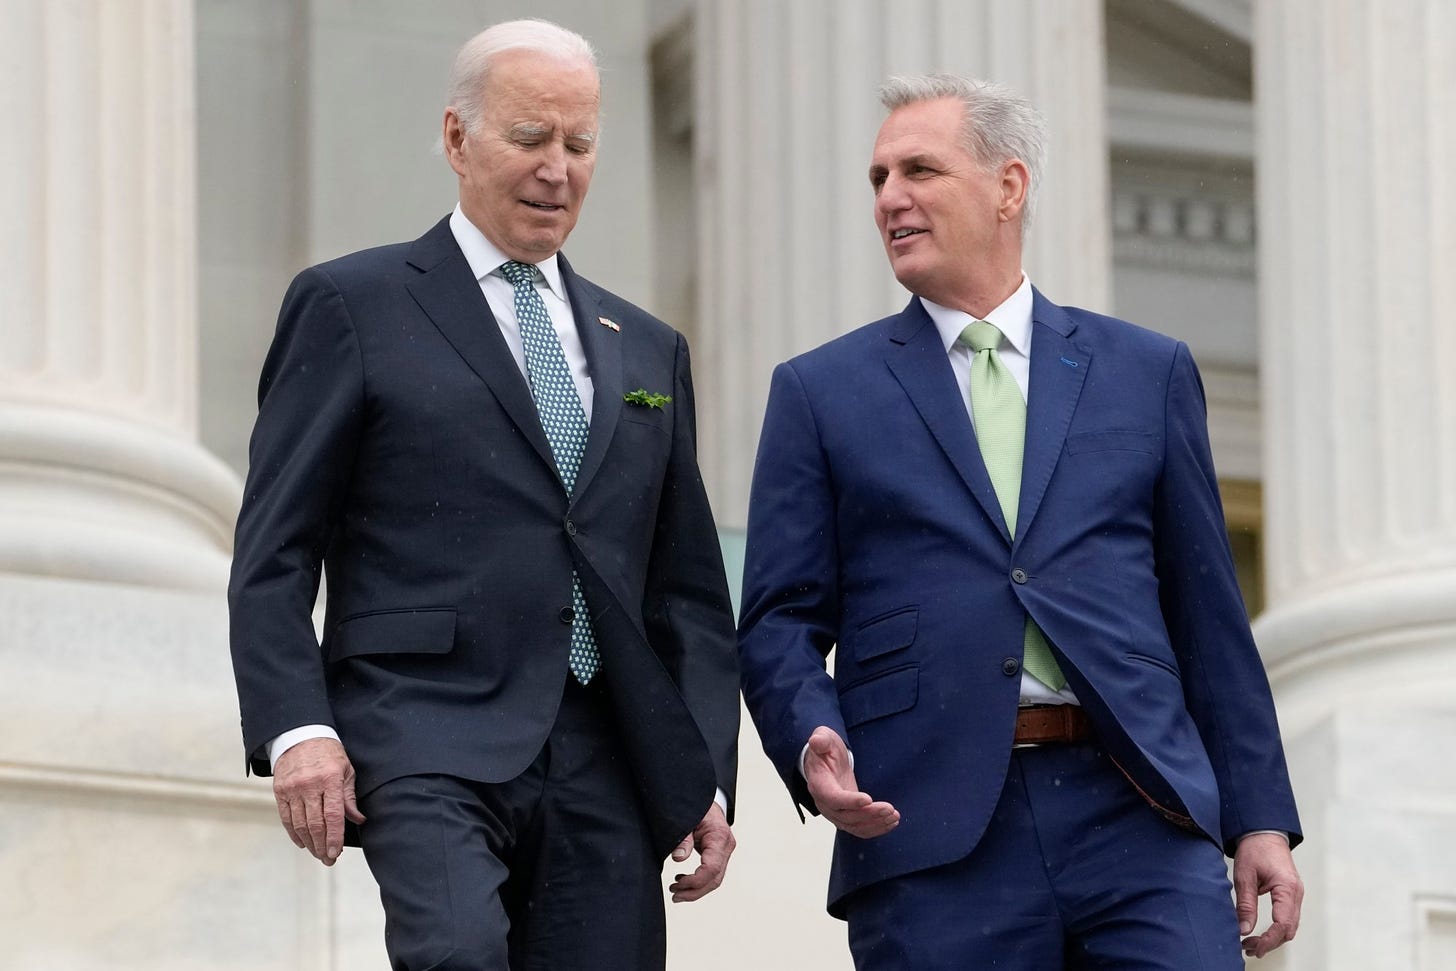 FILE - President Joe Biden talks with House Speaker Kevin McCarthy of Calif., as they walk down the House steps as they leave after attending an annual St. Patrick's Day luncheon gathering at the Capitol in Washington, March 17, 2023. The Tuesday, May 9, White House sitdown between the president and congressional leaders will be the first substantive talks between Biden and McCarthy in months, and comes weeks after House Republicans voted on a bill that would raise the debt limit but impose significant federal spending cuts. (AP Photo/Alex Brandon, File)